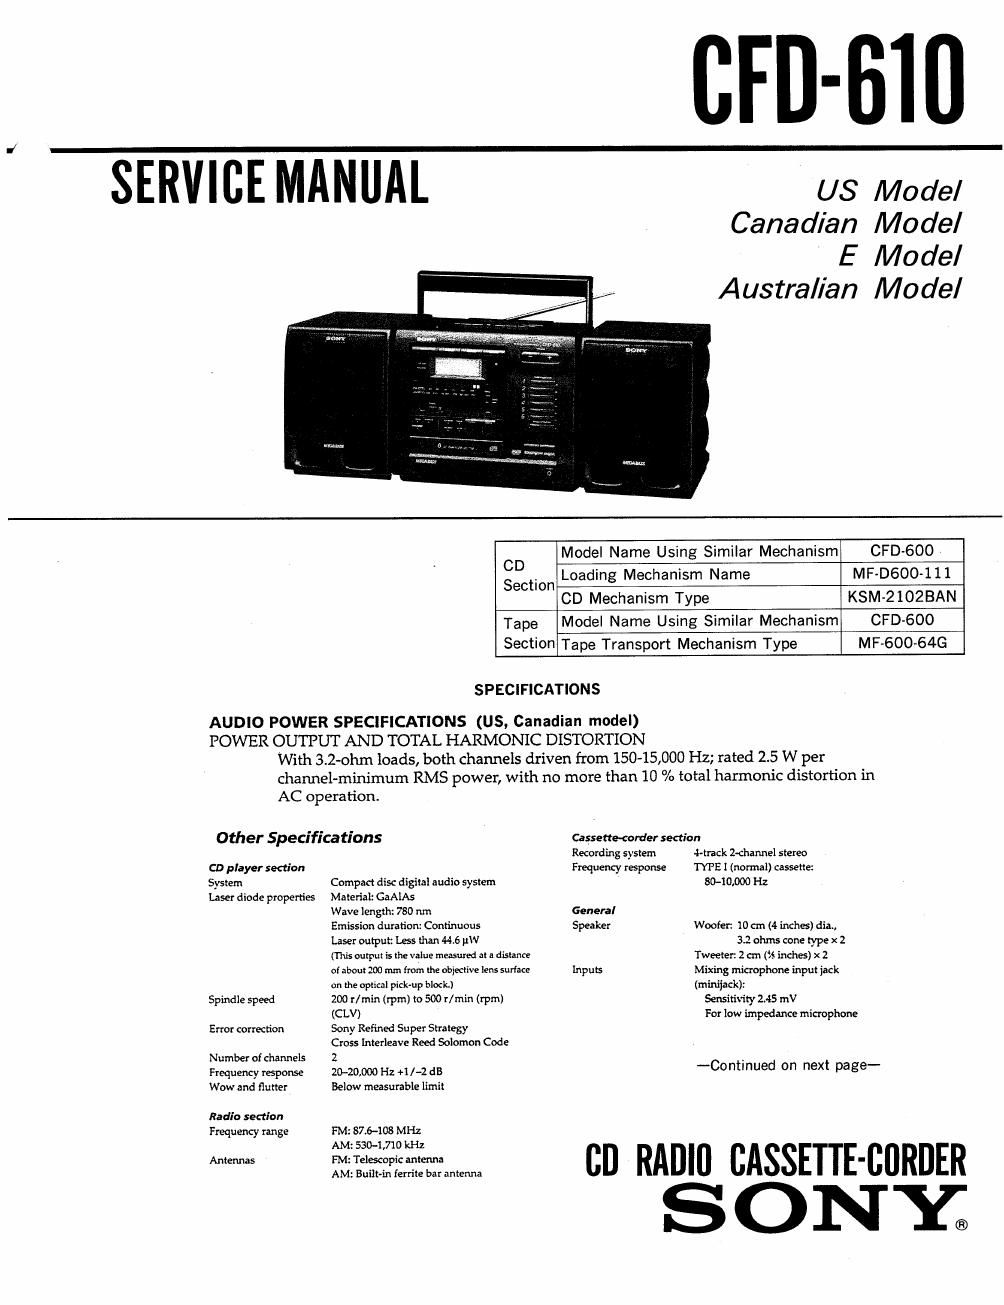 sony cfd 610 service manual